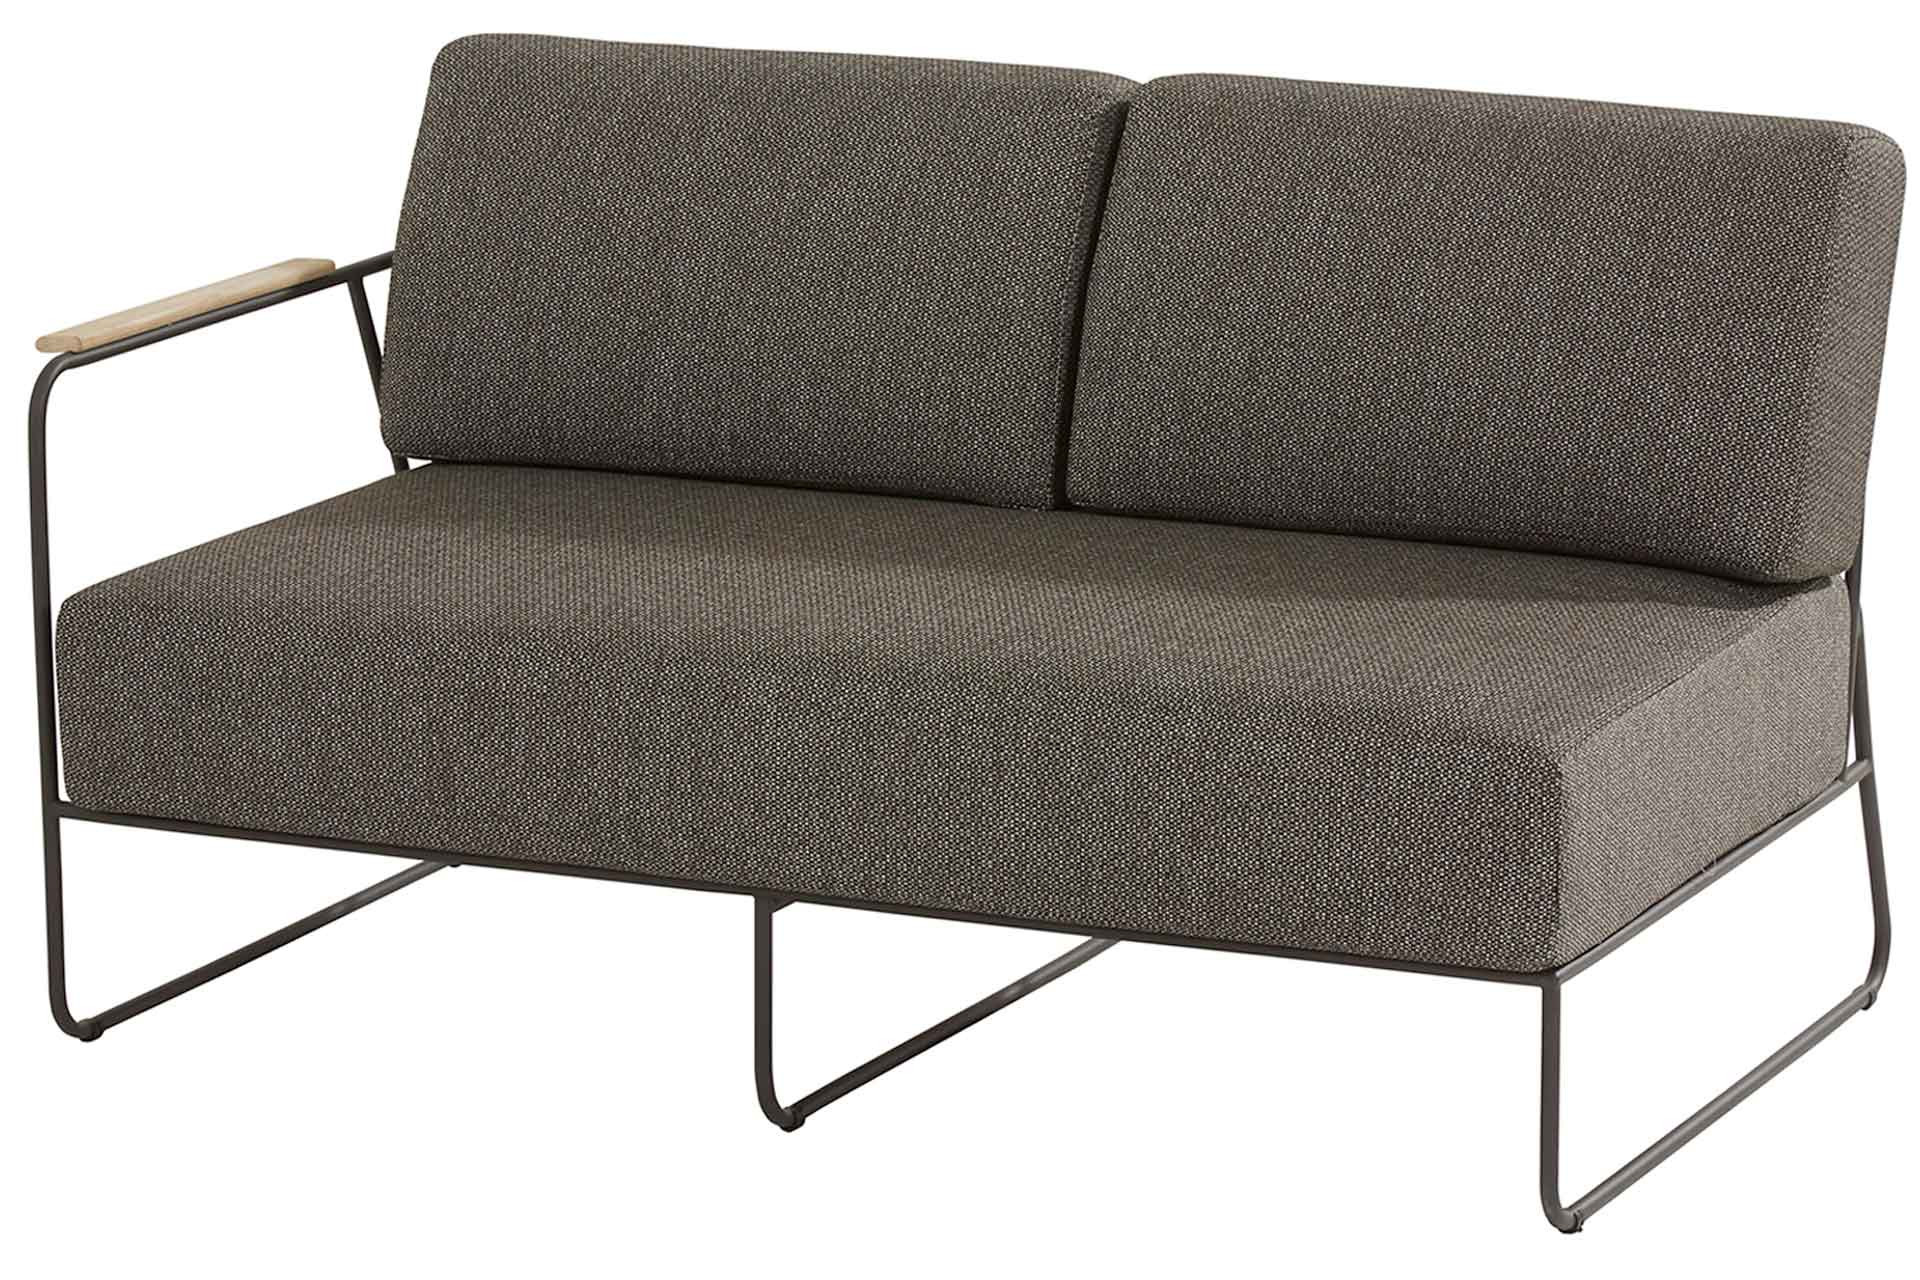 Coast modular 2 seater right arm with 4 cushions